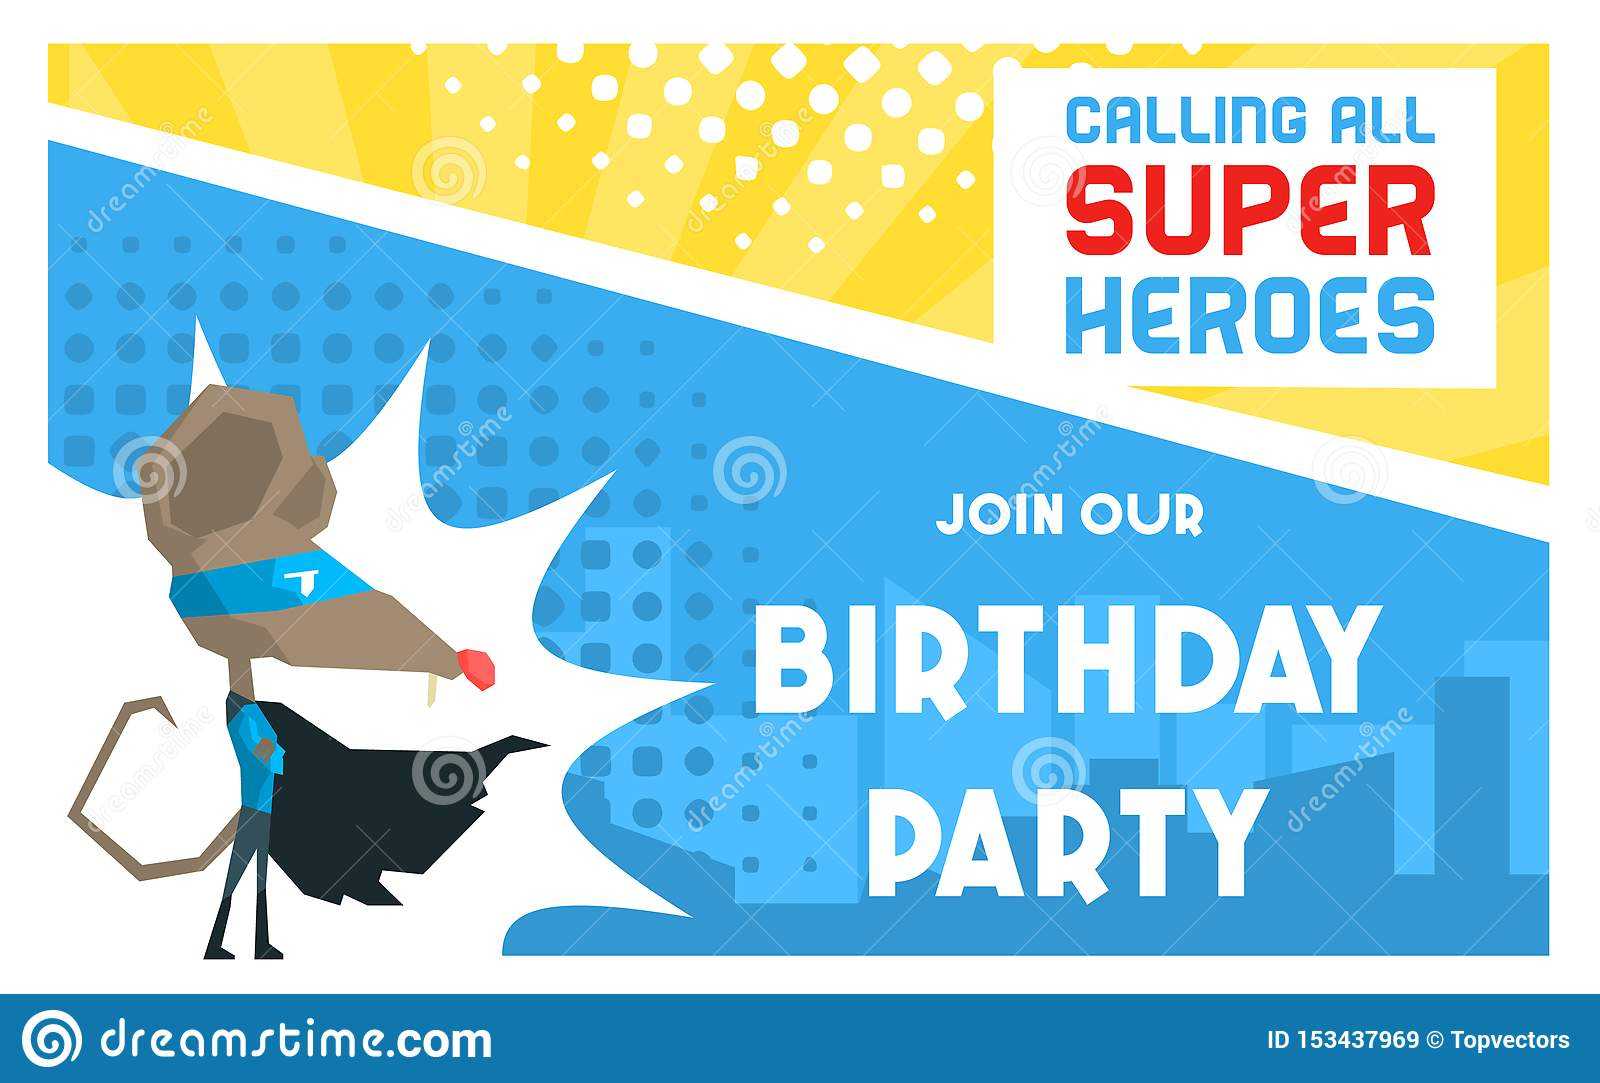 Superhero Birthday Party Banner Template, Cute Funny Mouse Intended For Superhero Birthday Card Template